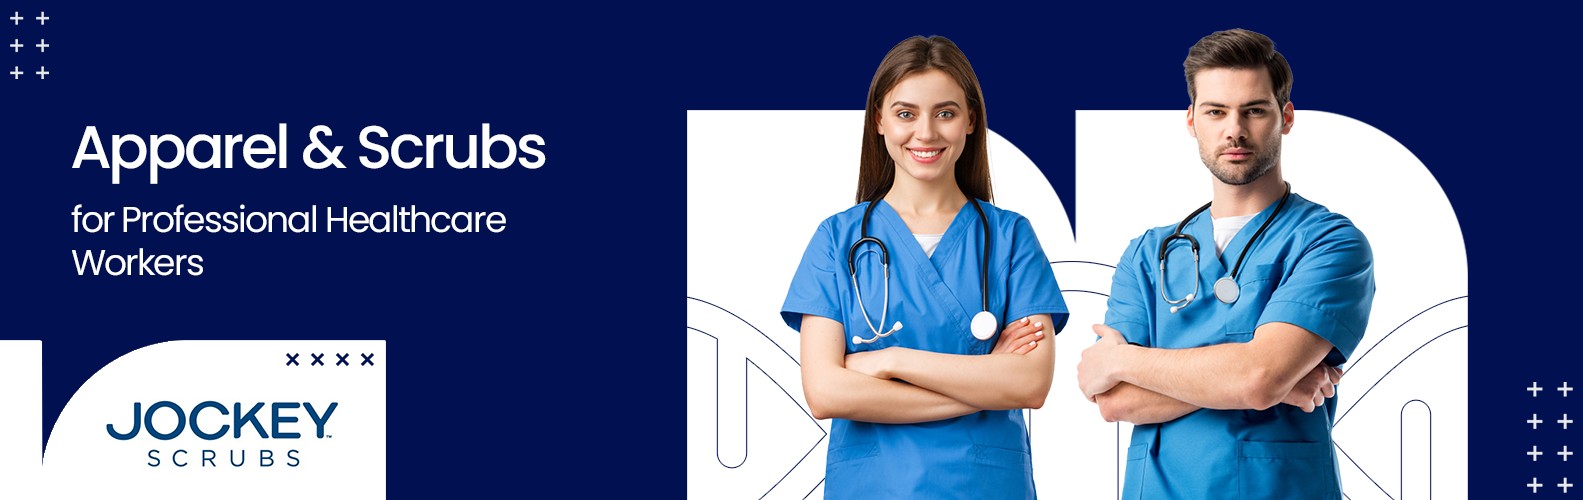 Apparel & Scrubs for Professional Healthcare Workers